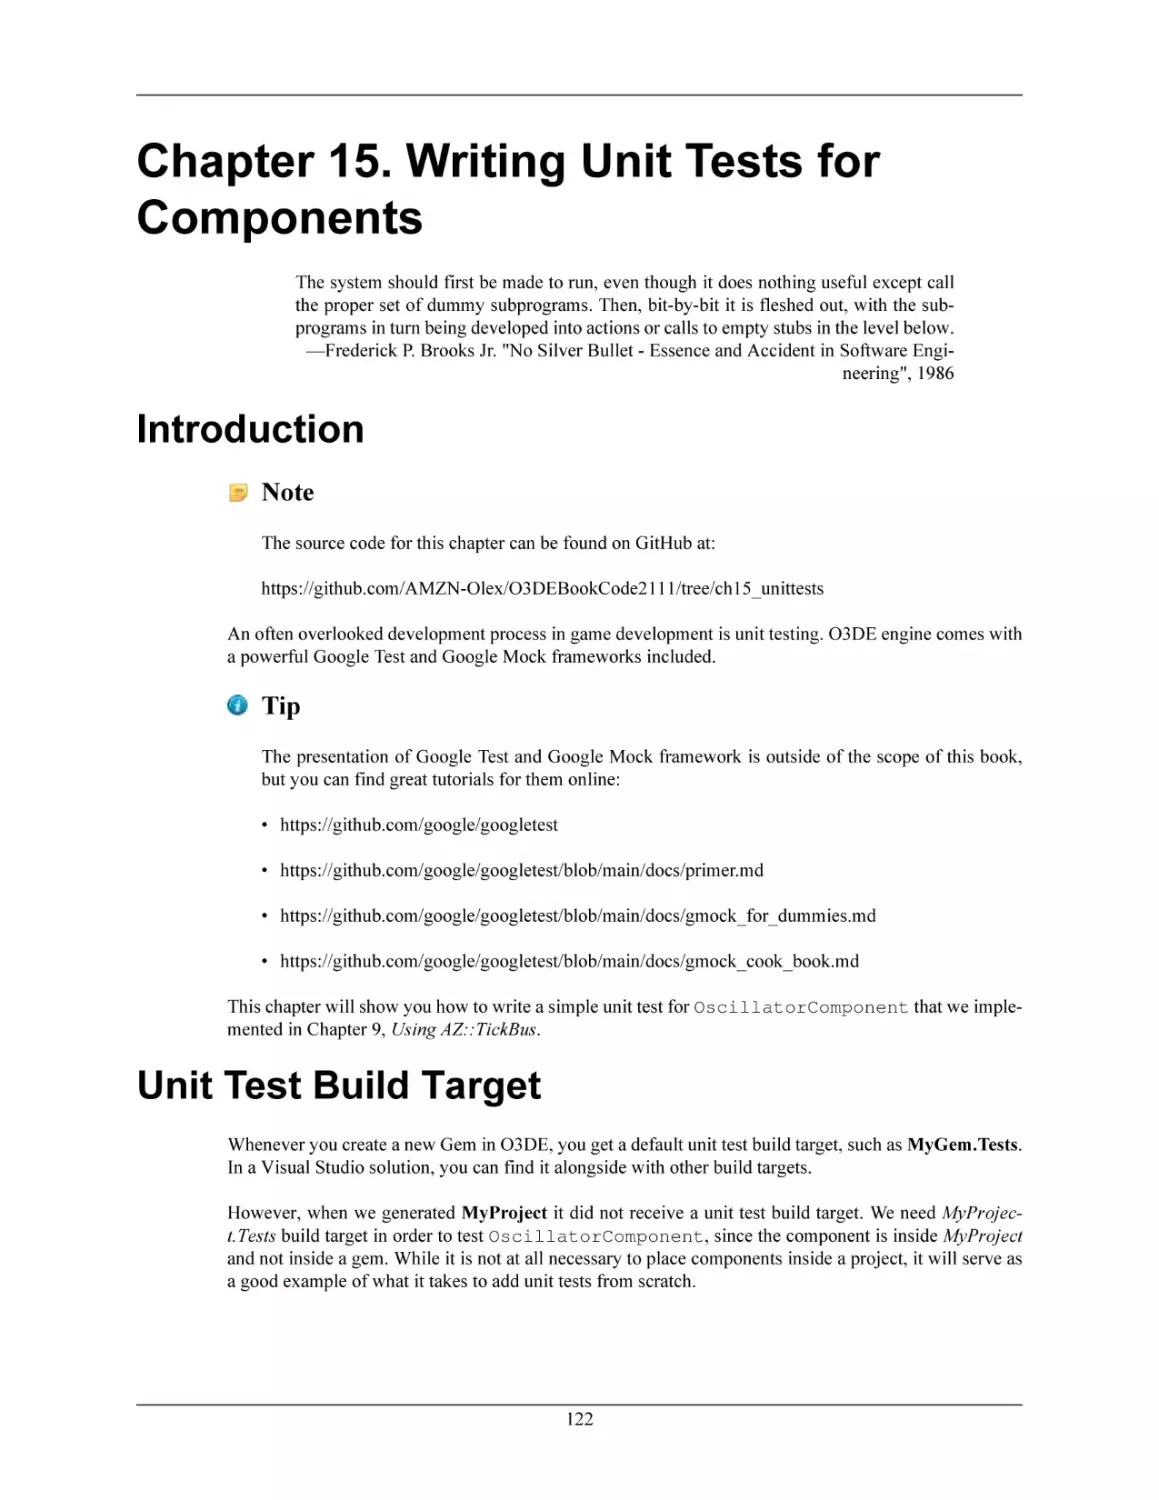 Chapter 15. Writing Unit Tests for Components
Introduction
Unit Test Build Target